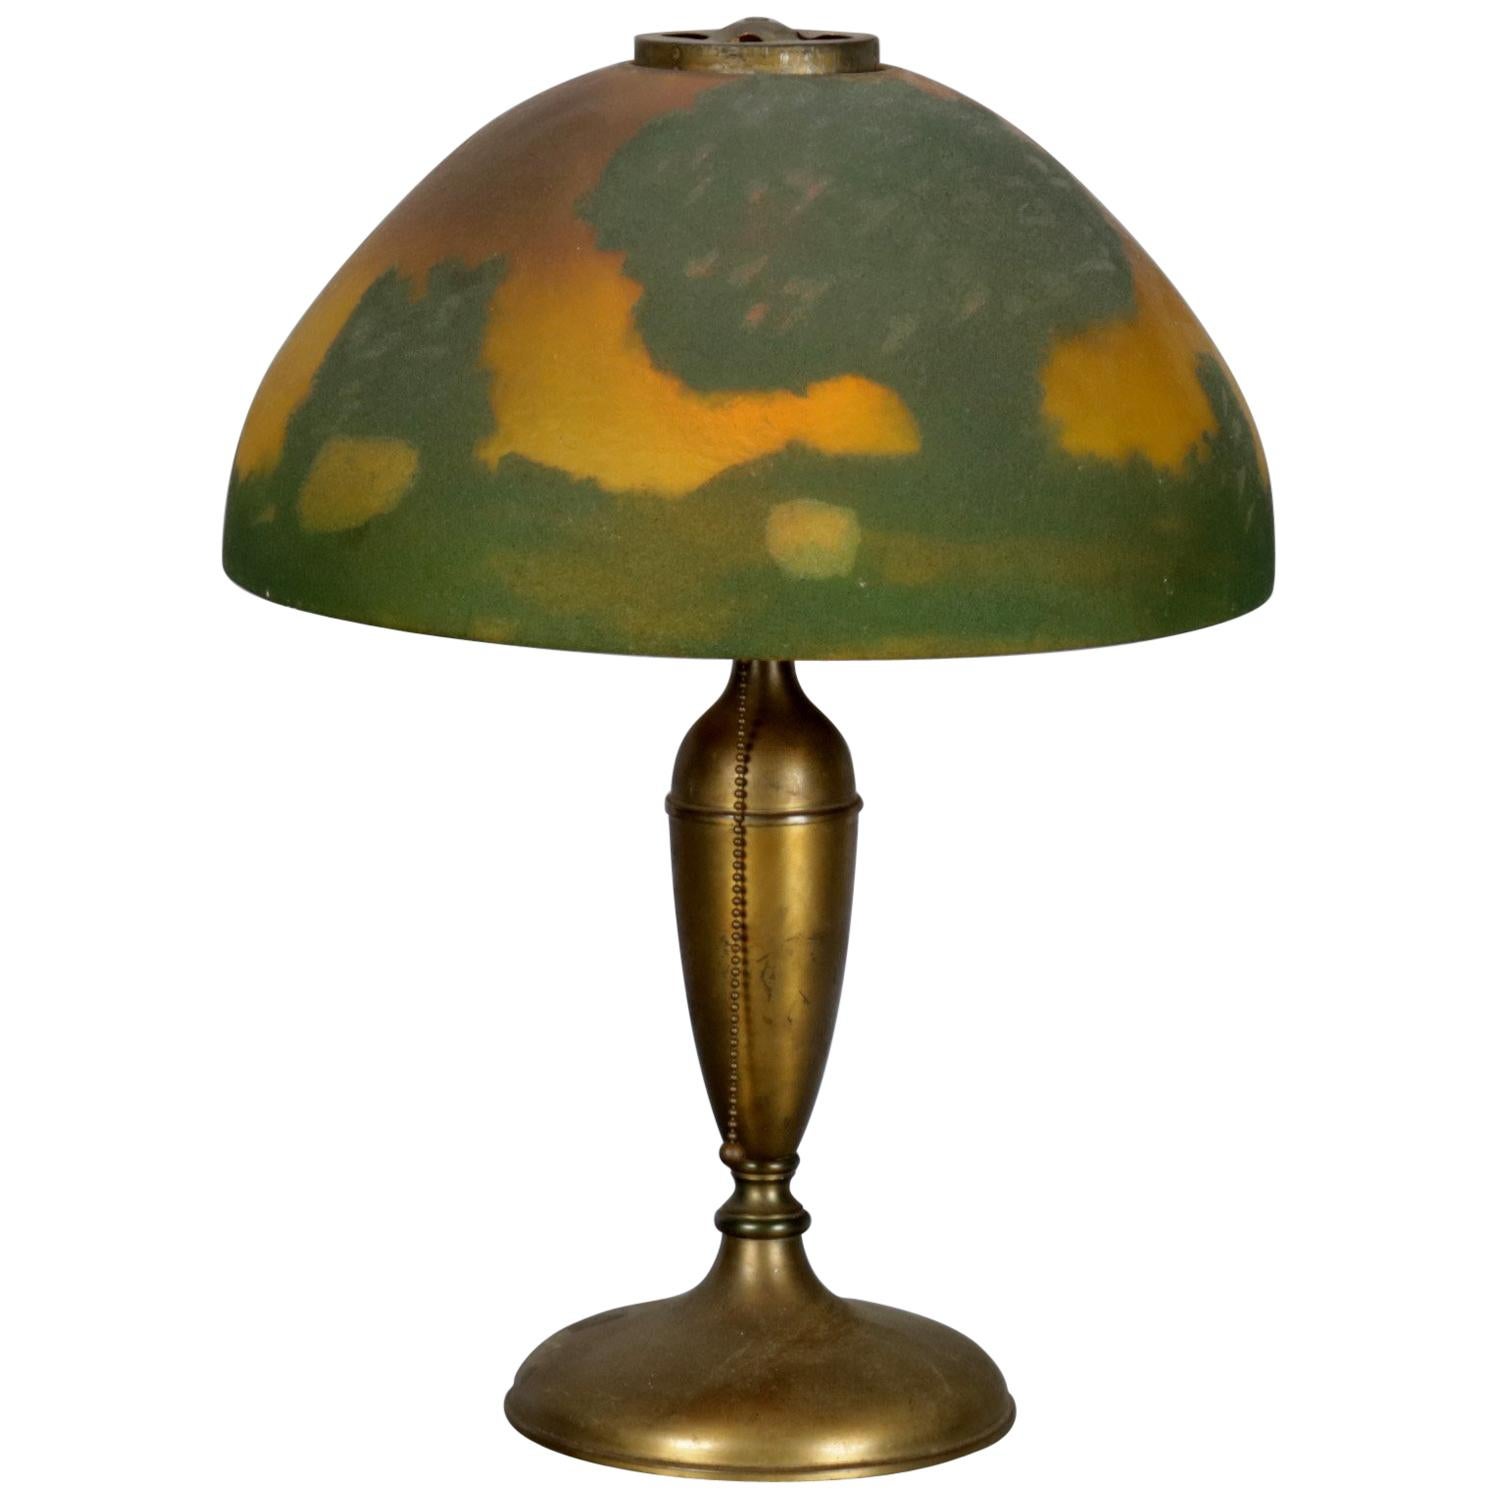 Antique Arts and Crafts Jefferson Lamp with Reverse Painted Landscape Scene